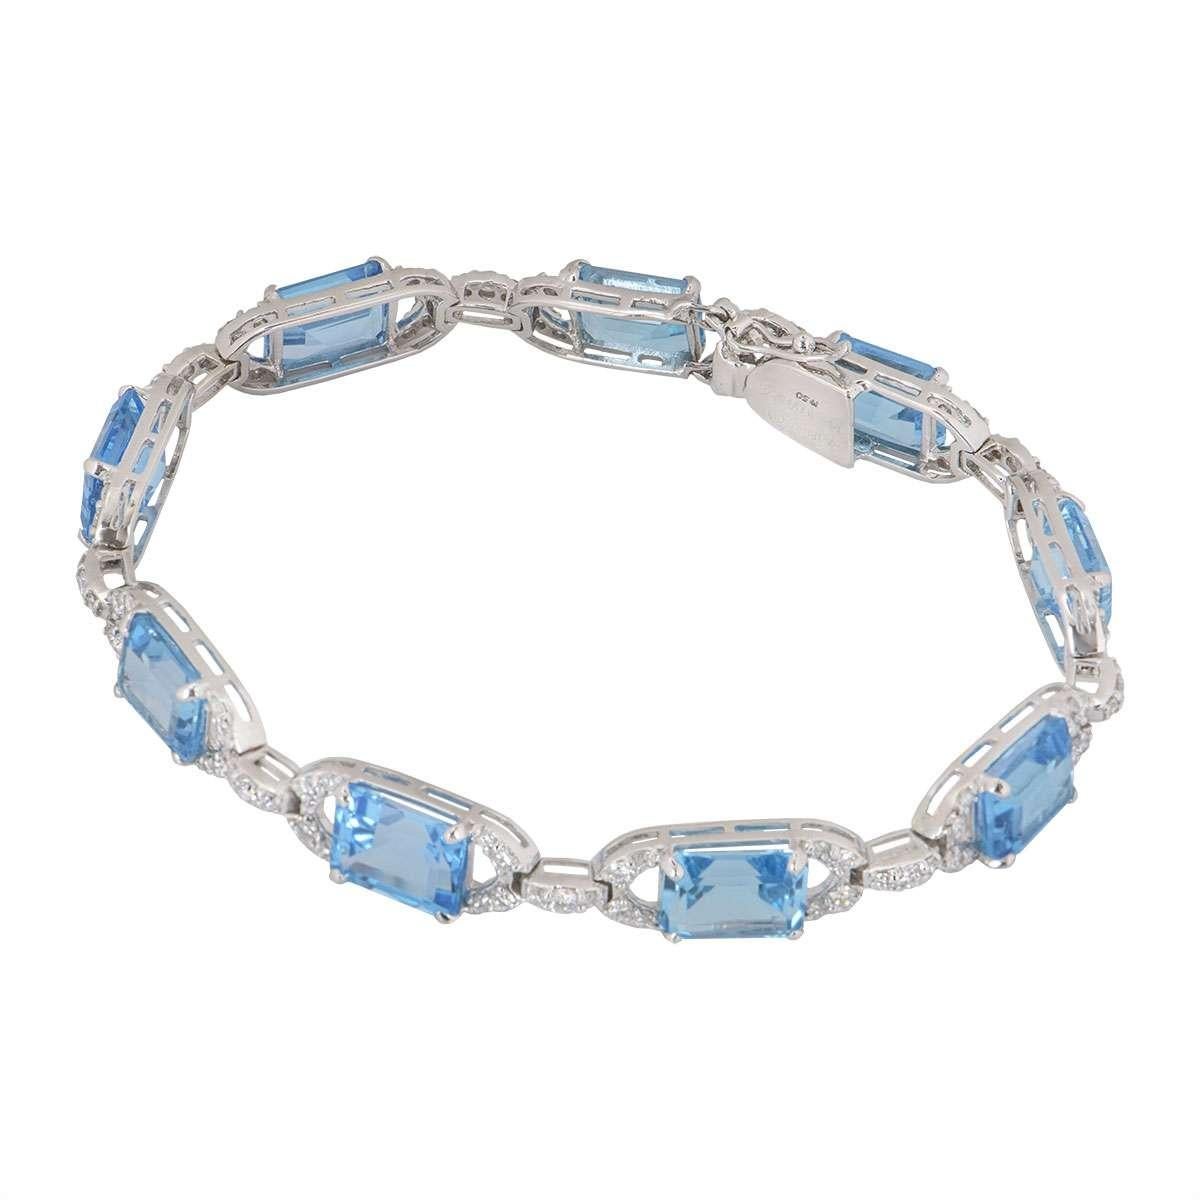 An 18k white gold diamond and topaz bracelet. The bracelet is set with 9 emerald shaped topaz stones which are complemented by round brilliant cut diamonds on the conjoining mounts. The topaz has a total weight of 19.50ct and the diamonds total